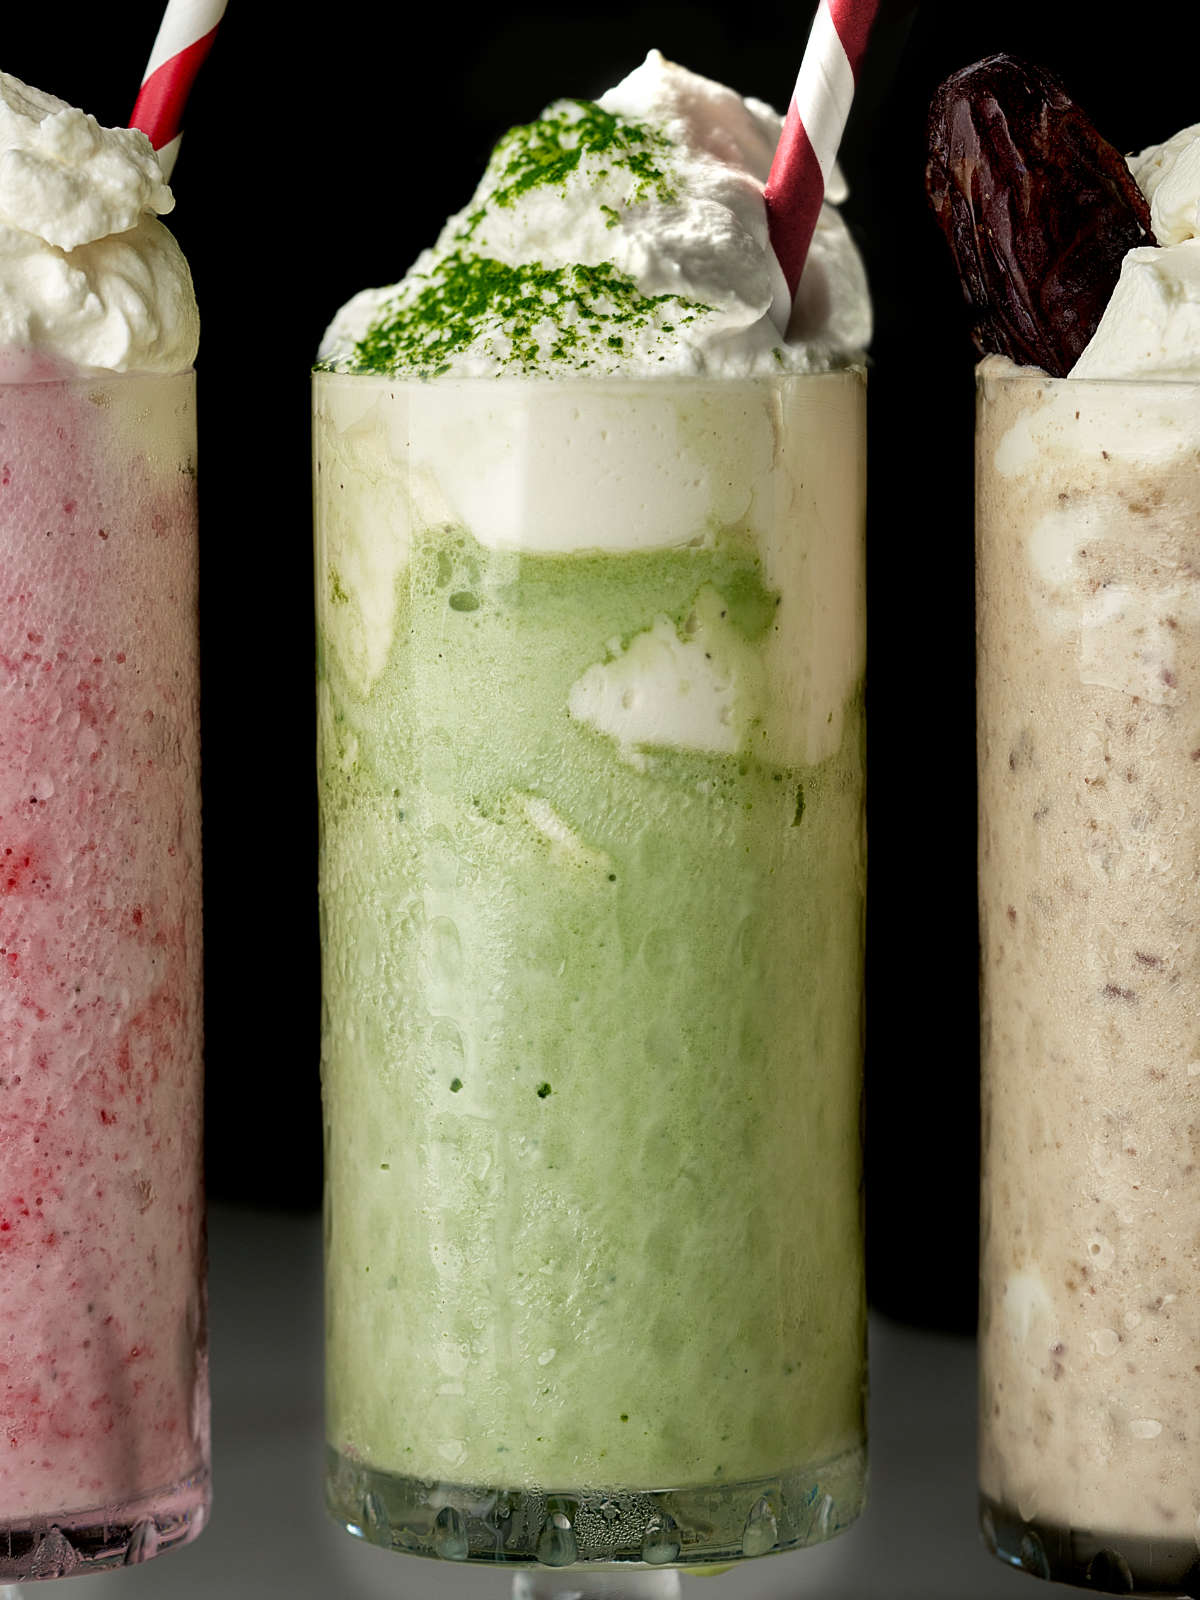 Green milkshake in between and pink milkshake and a light brown milkshake, all with red and white striped straws.